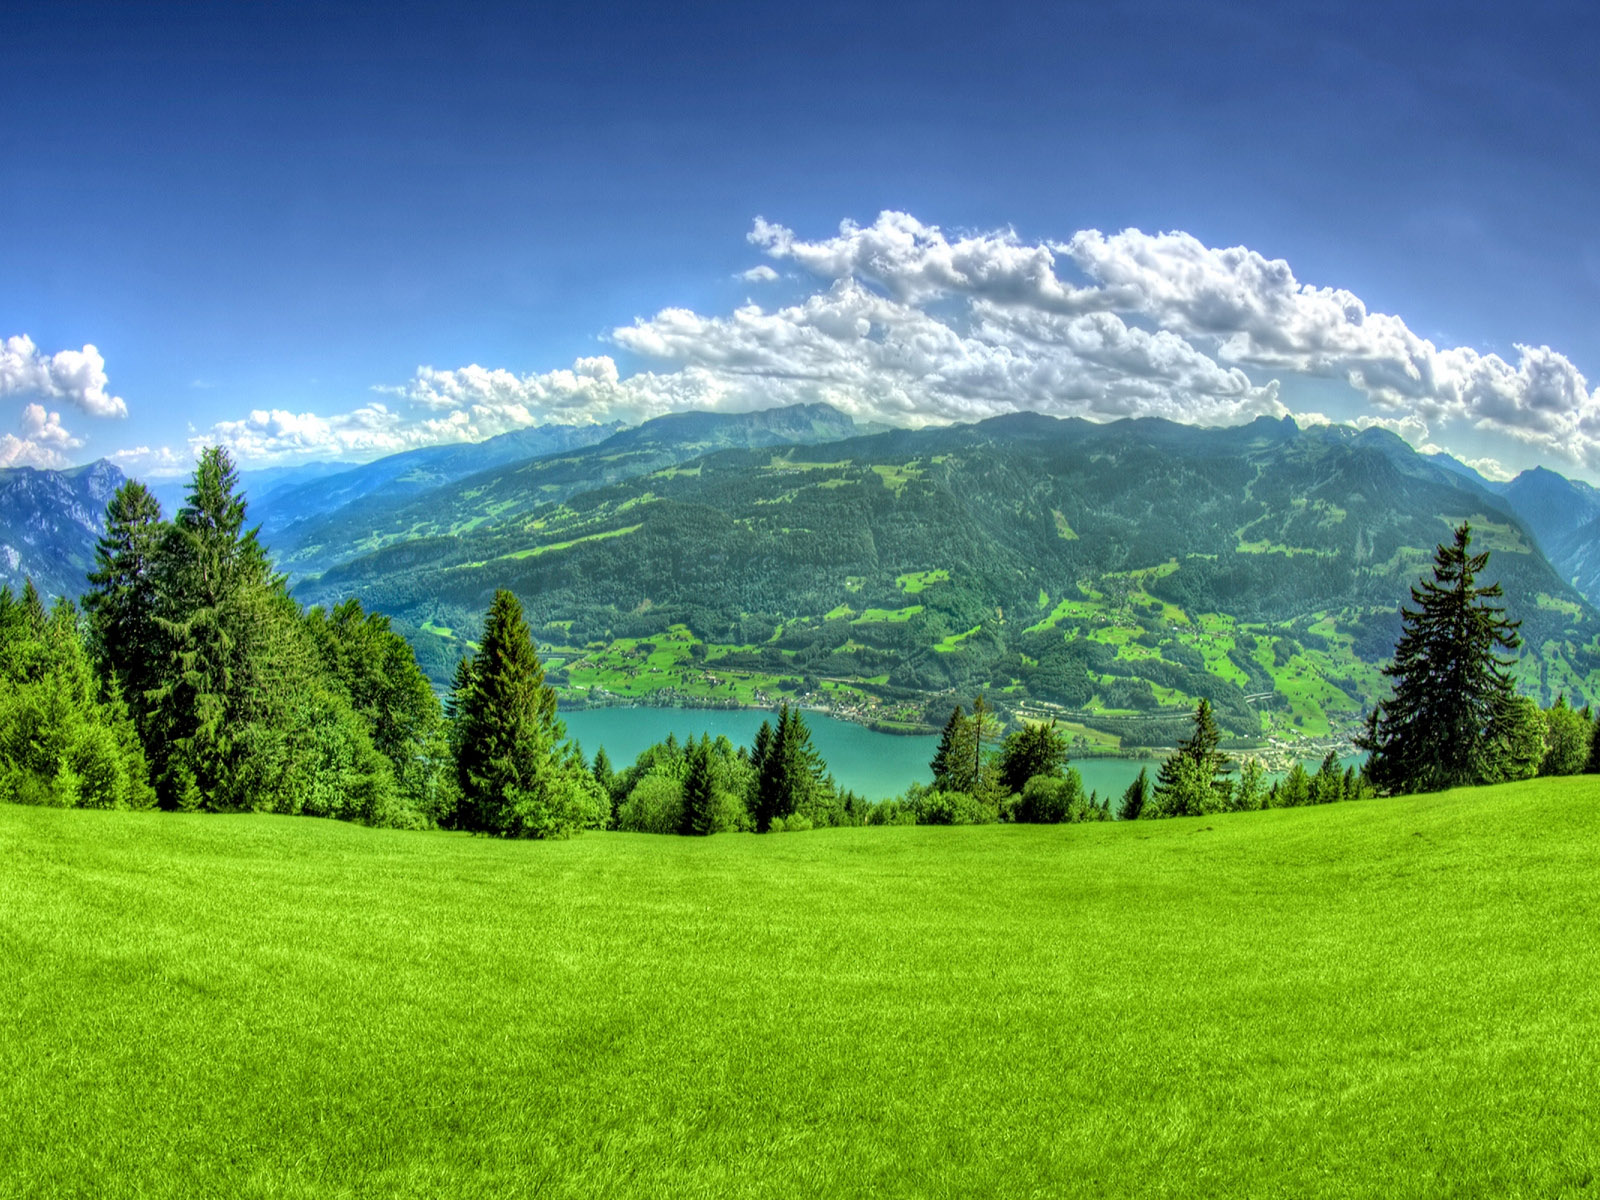 Wallpaper Green Mountain On Hd Free Download Images Of Iphone Grass ...